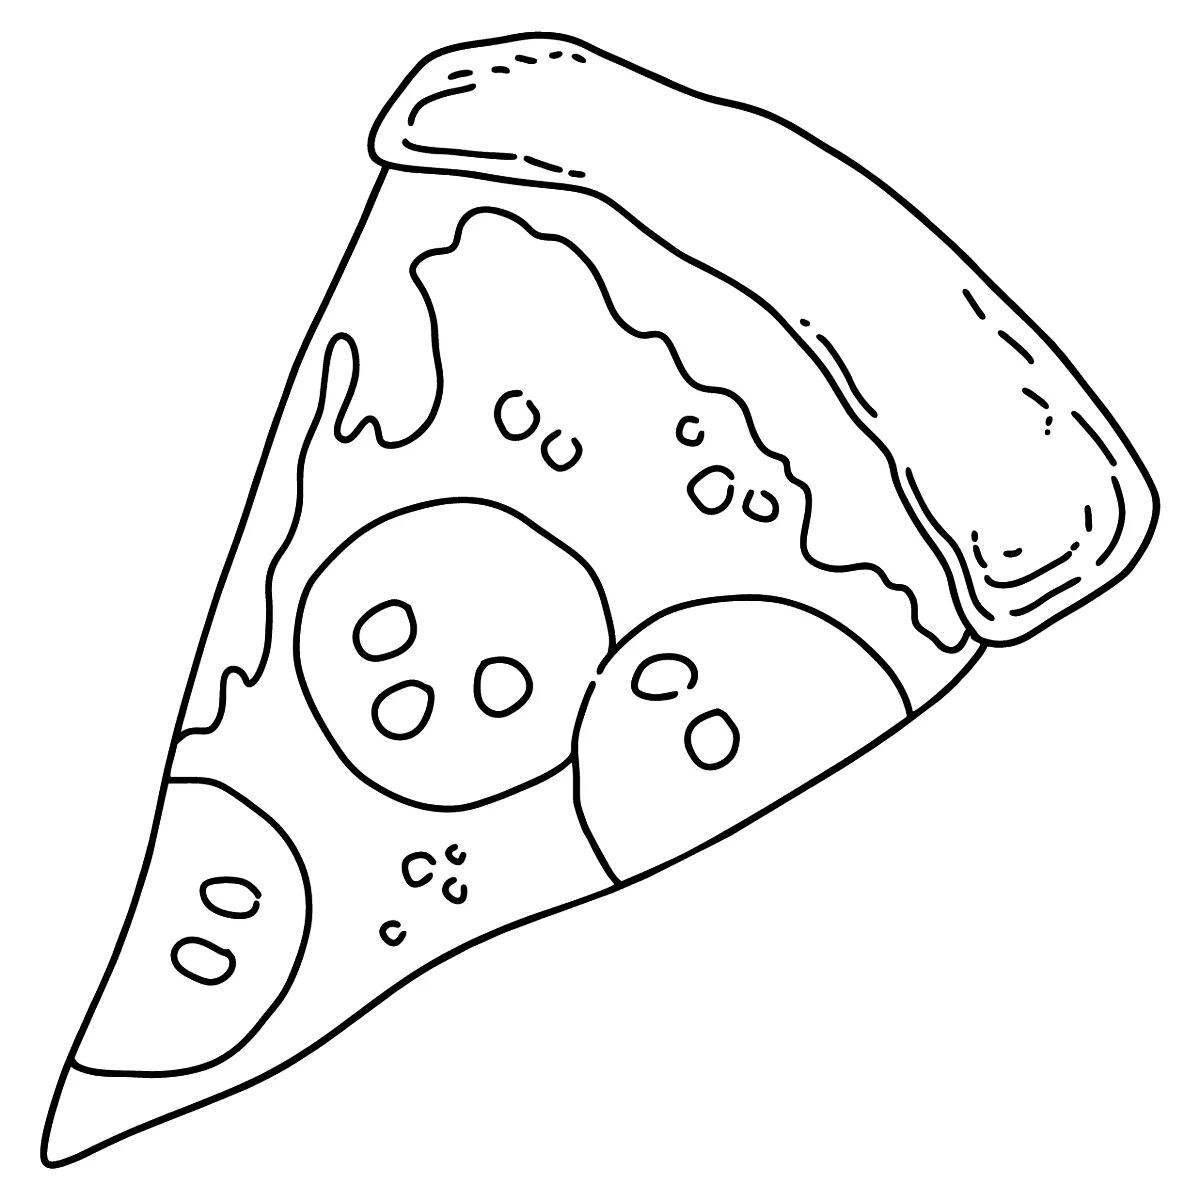 Rich pepperoni pizza coloring